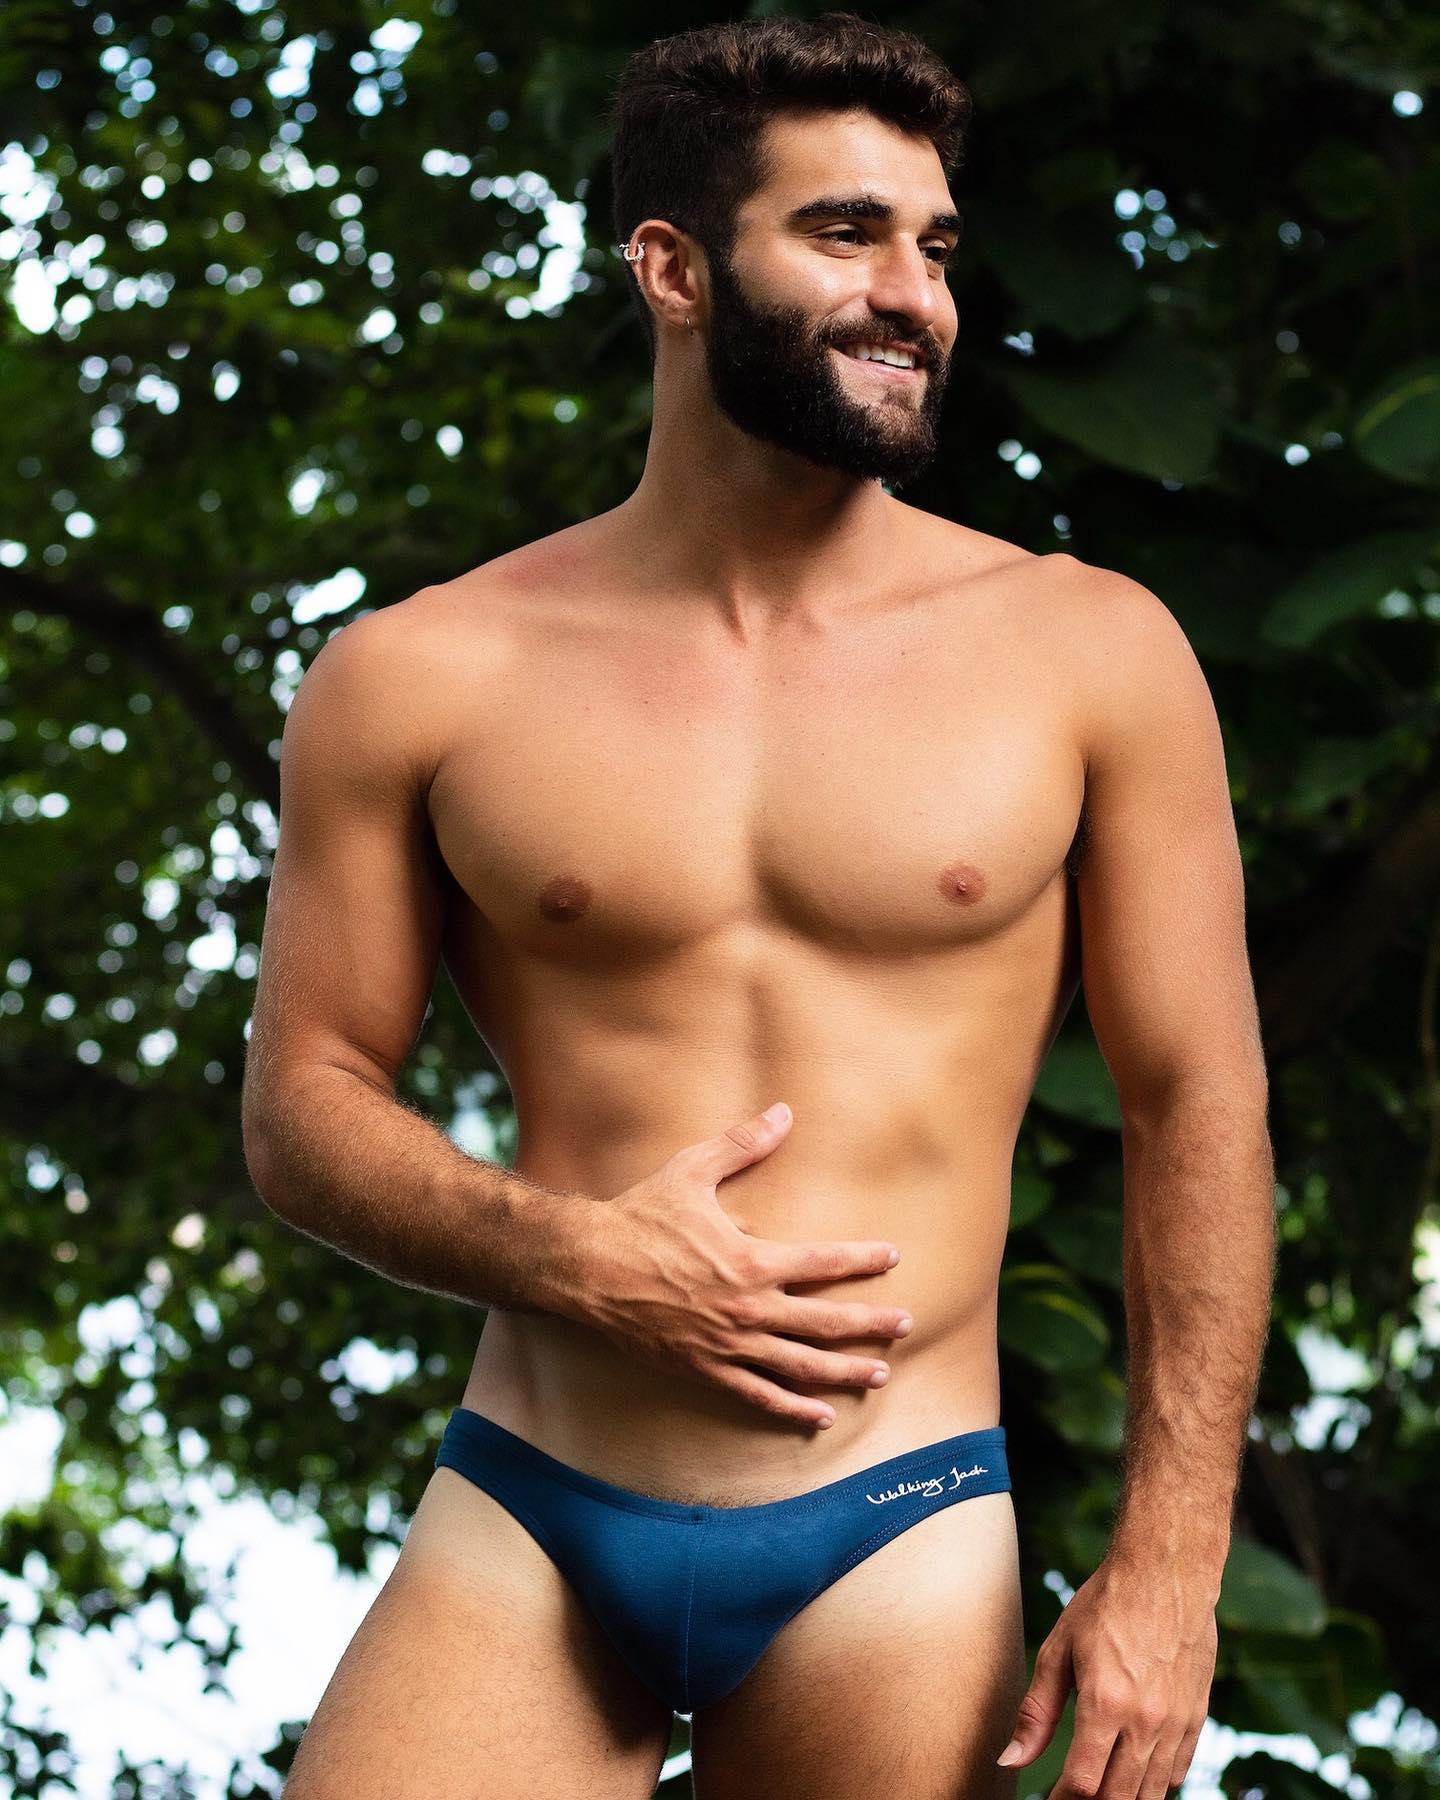 The Micro Briefs of Walking Jack in navy blue. These men's bikinis feature a super low, super sexy style and are made from organic cotton. Check them out:
_____
menandunderwear.com/shop